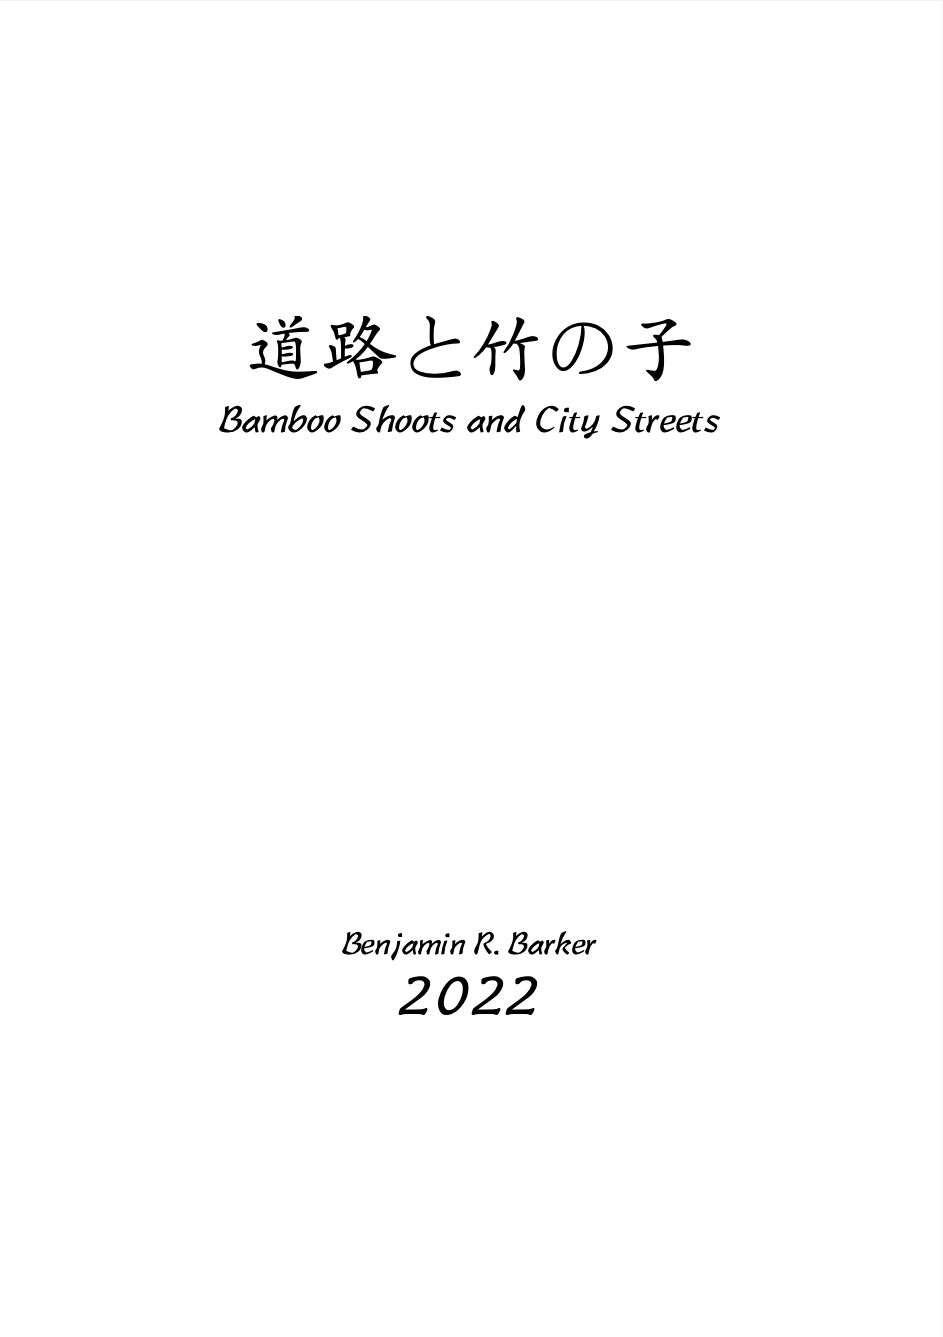 Bamboo Shoots And City Streets (Score Only) by Benjamin R. Barker